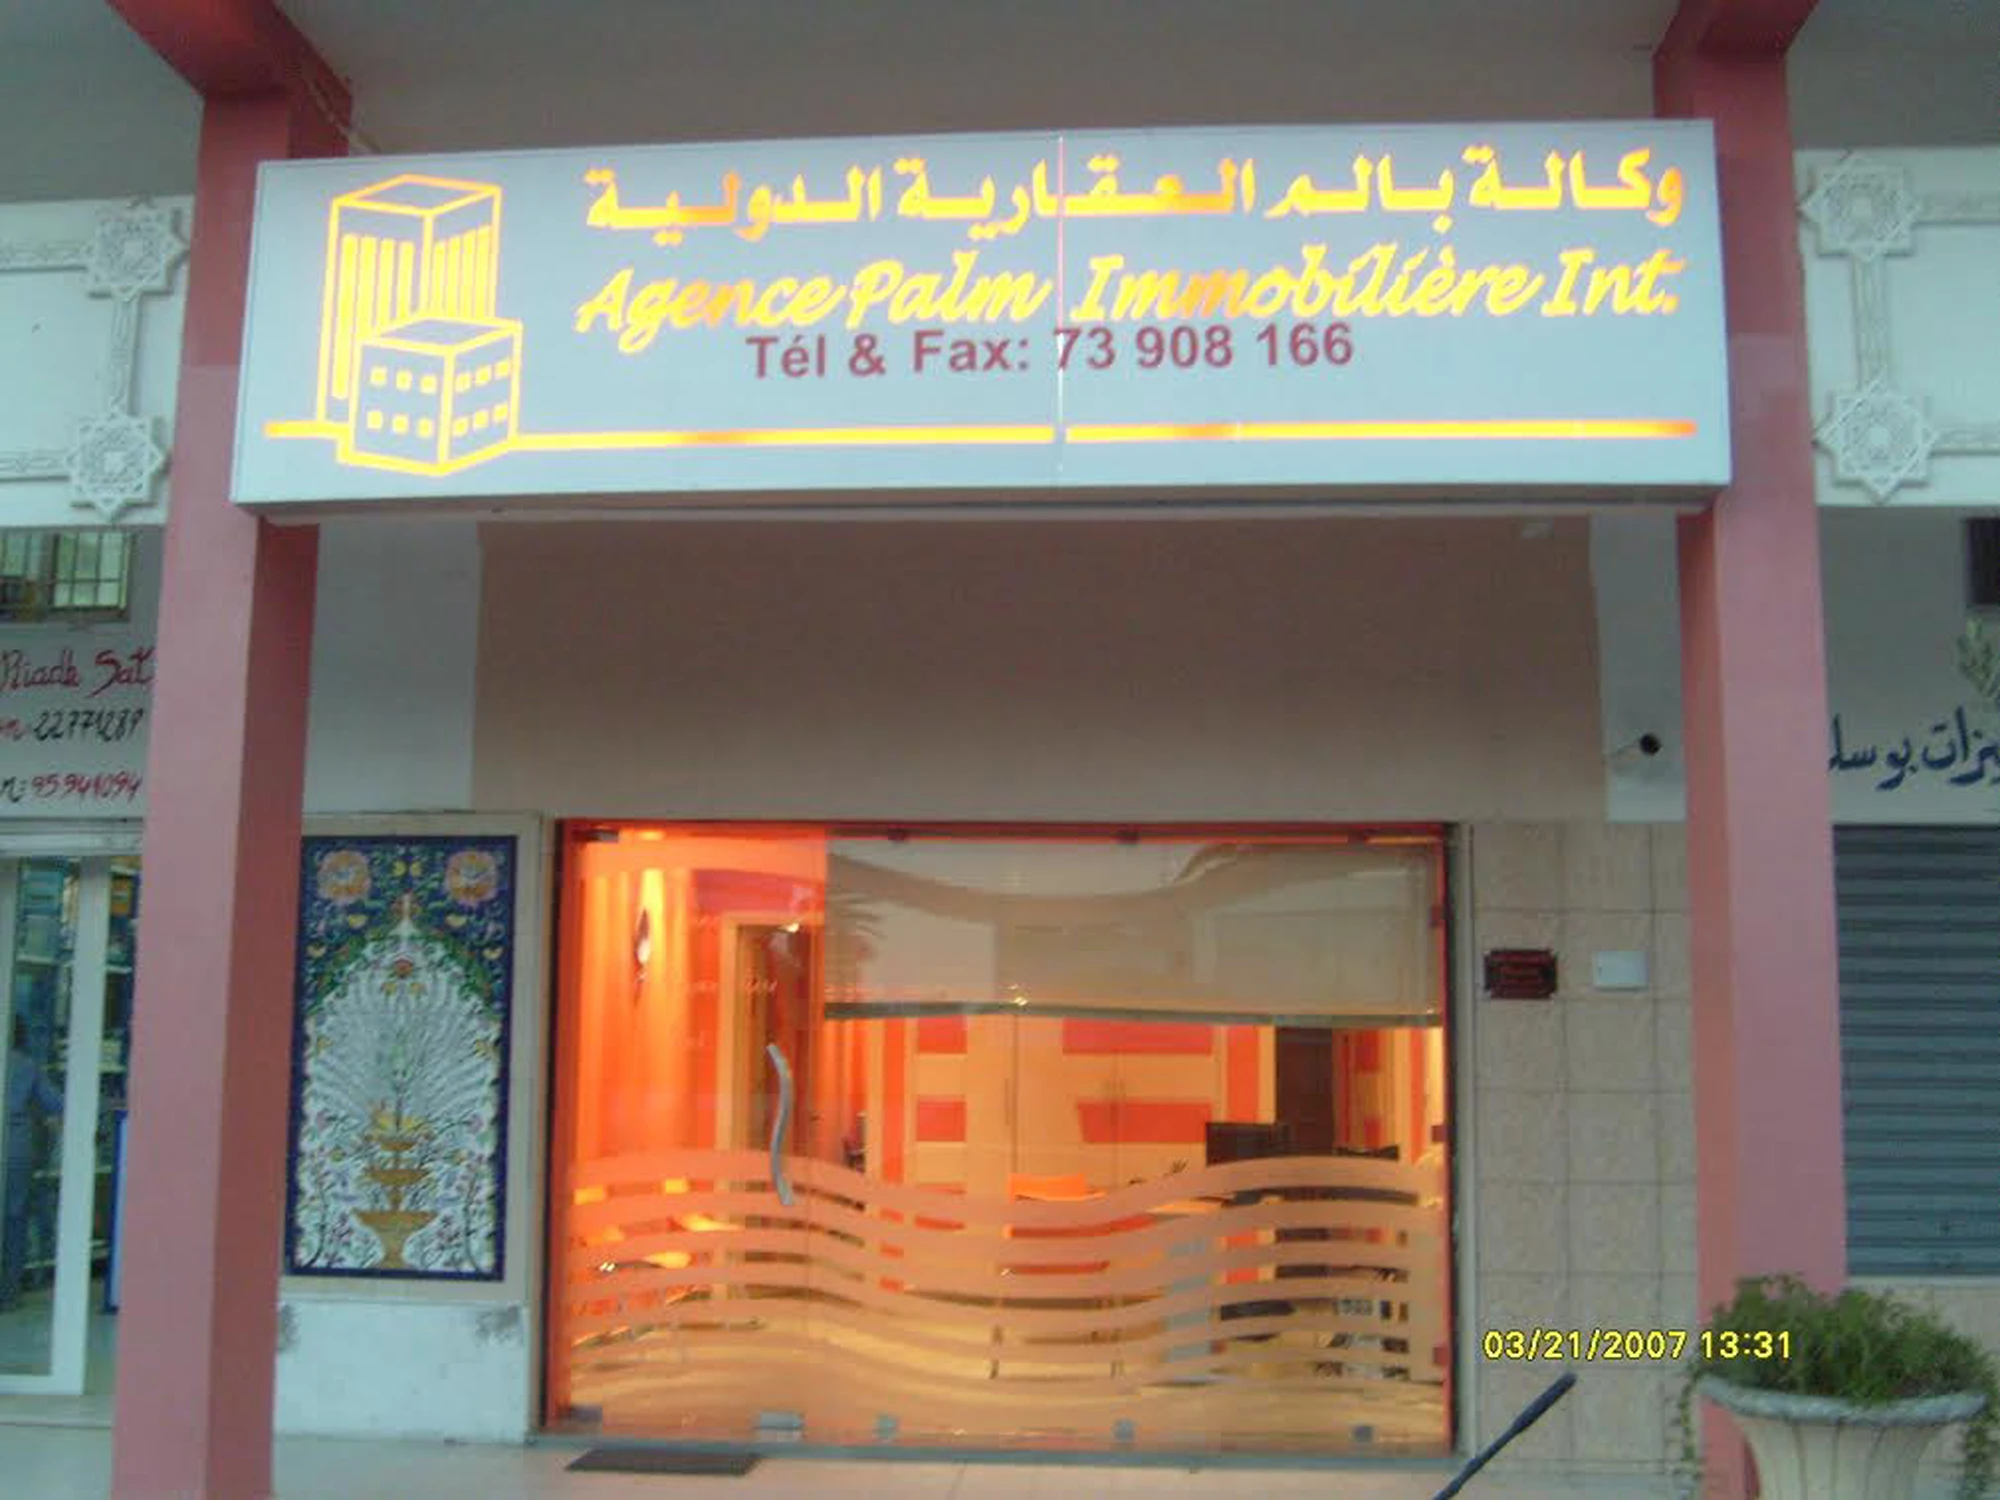 tayara shop cover of Agence Palm Immobiliere